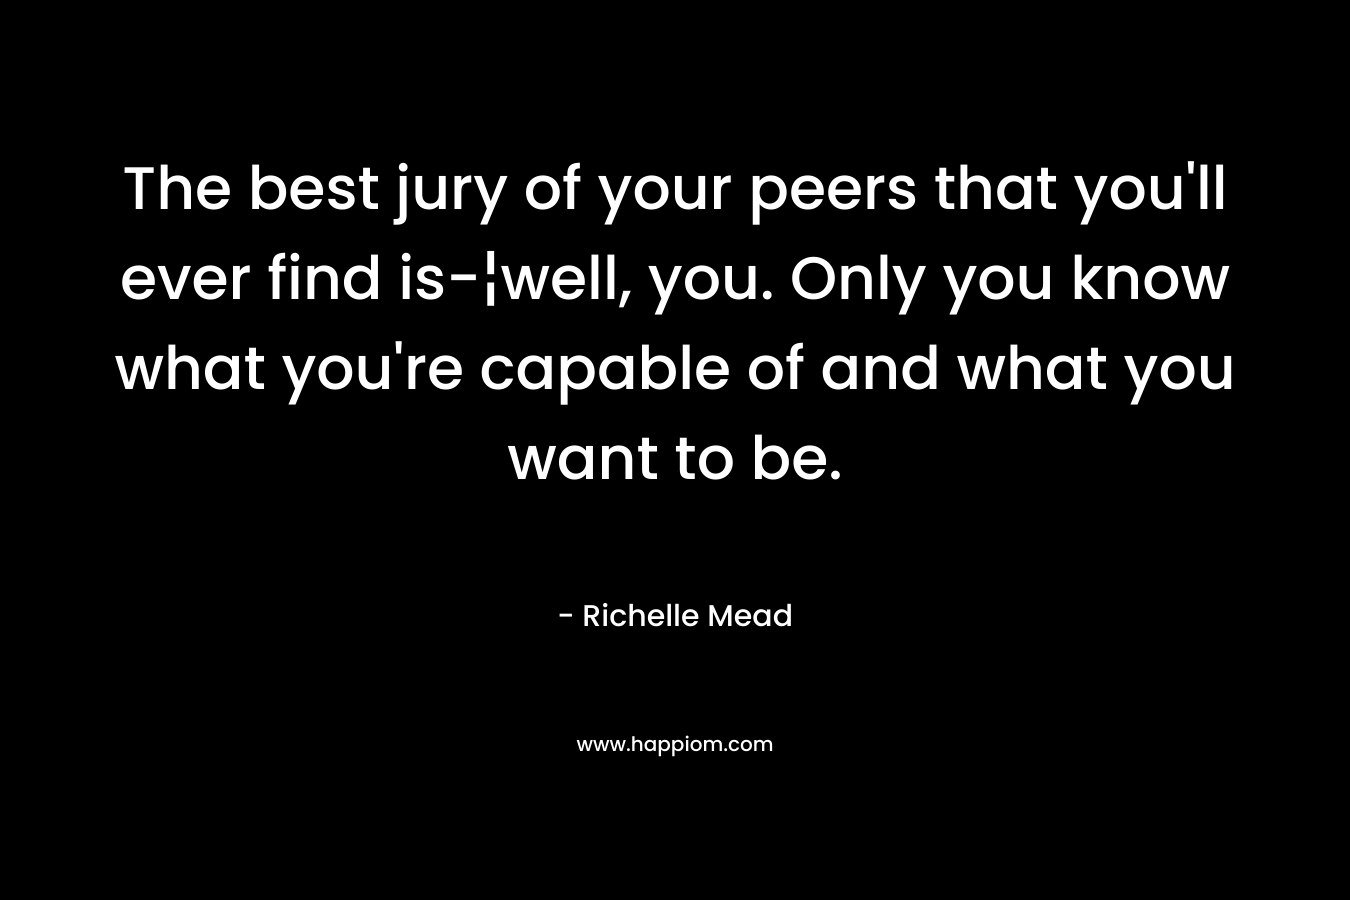 The best jury of your peers that you'll ever find is-¦well, you. Only you know what you're capable of and what you want to be.